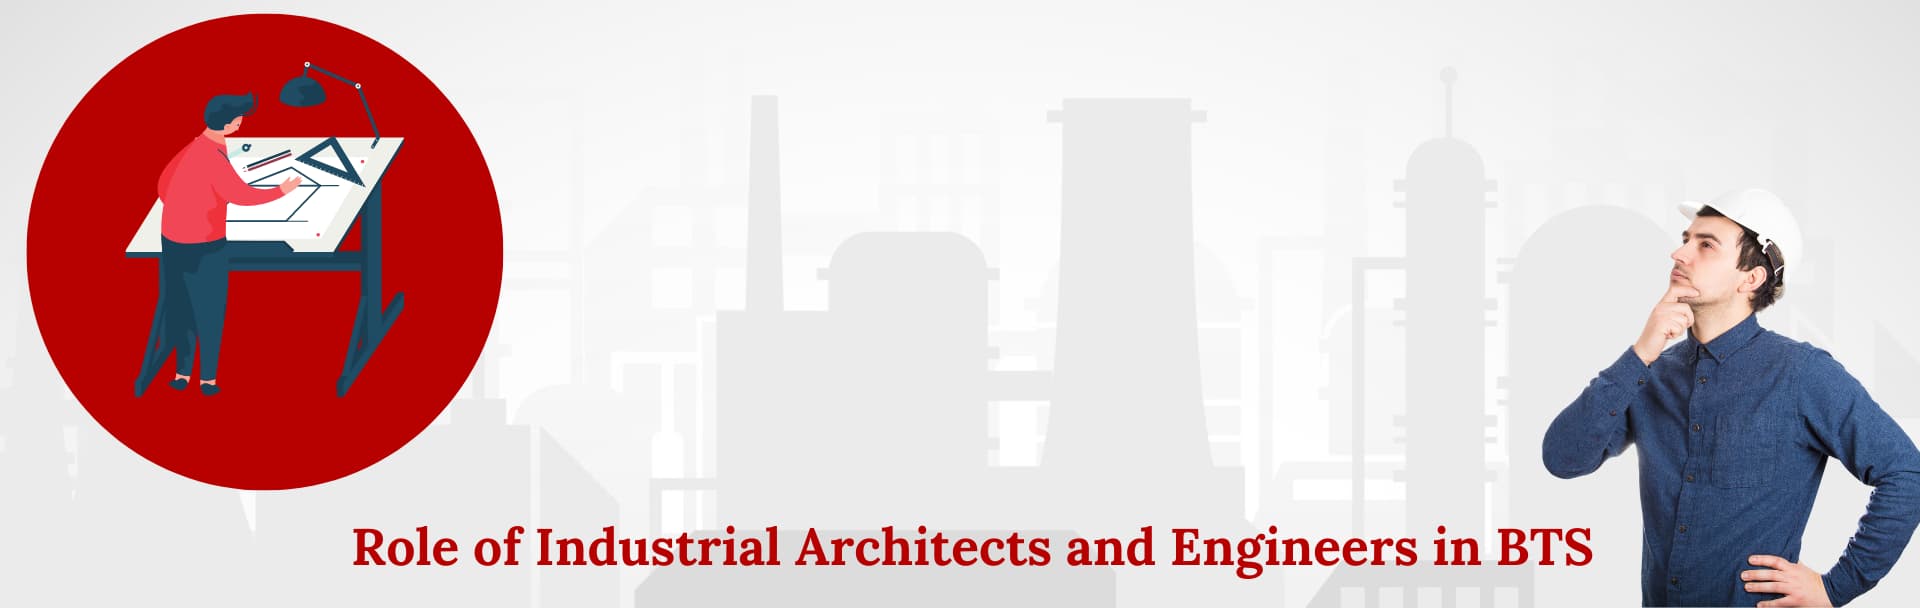 Architects and industrial design consultants